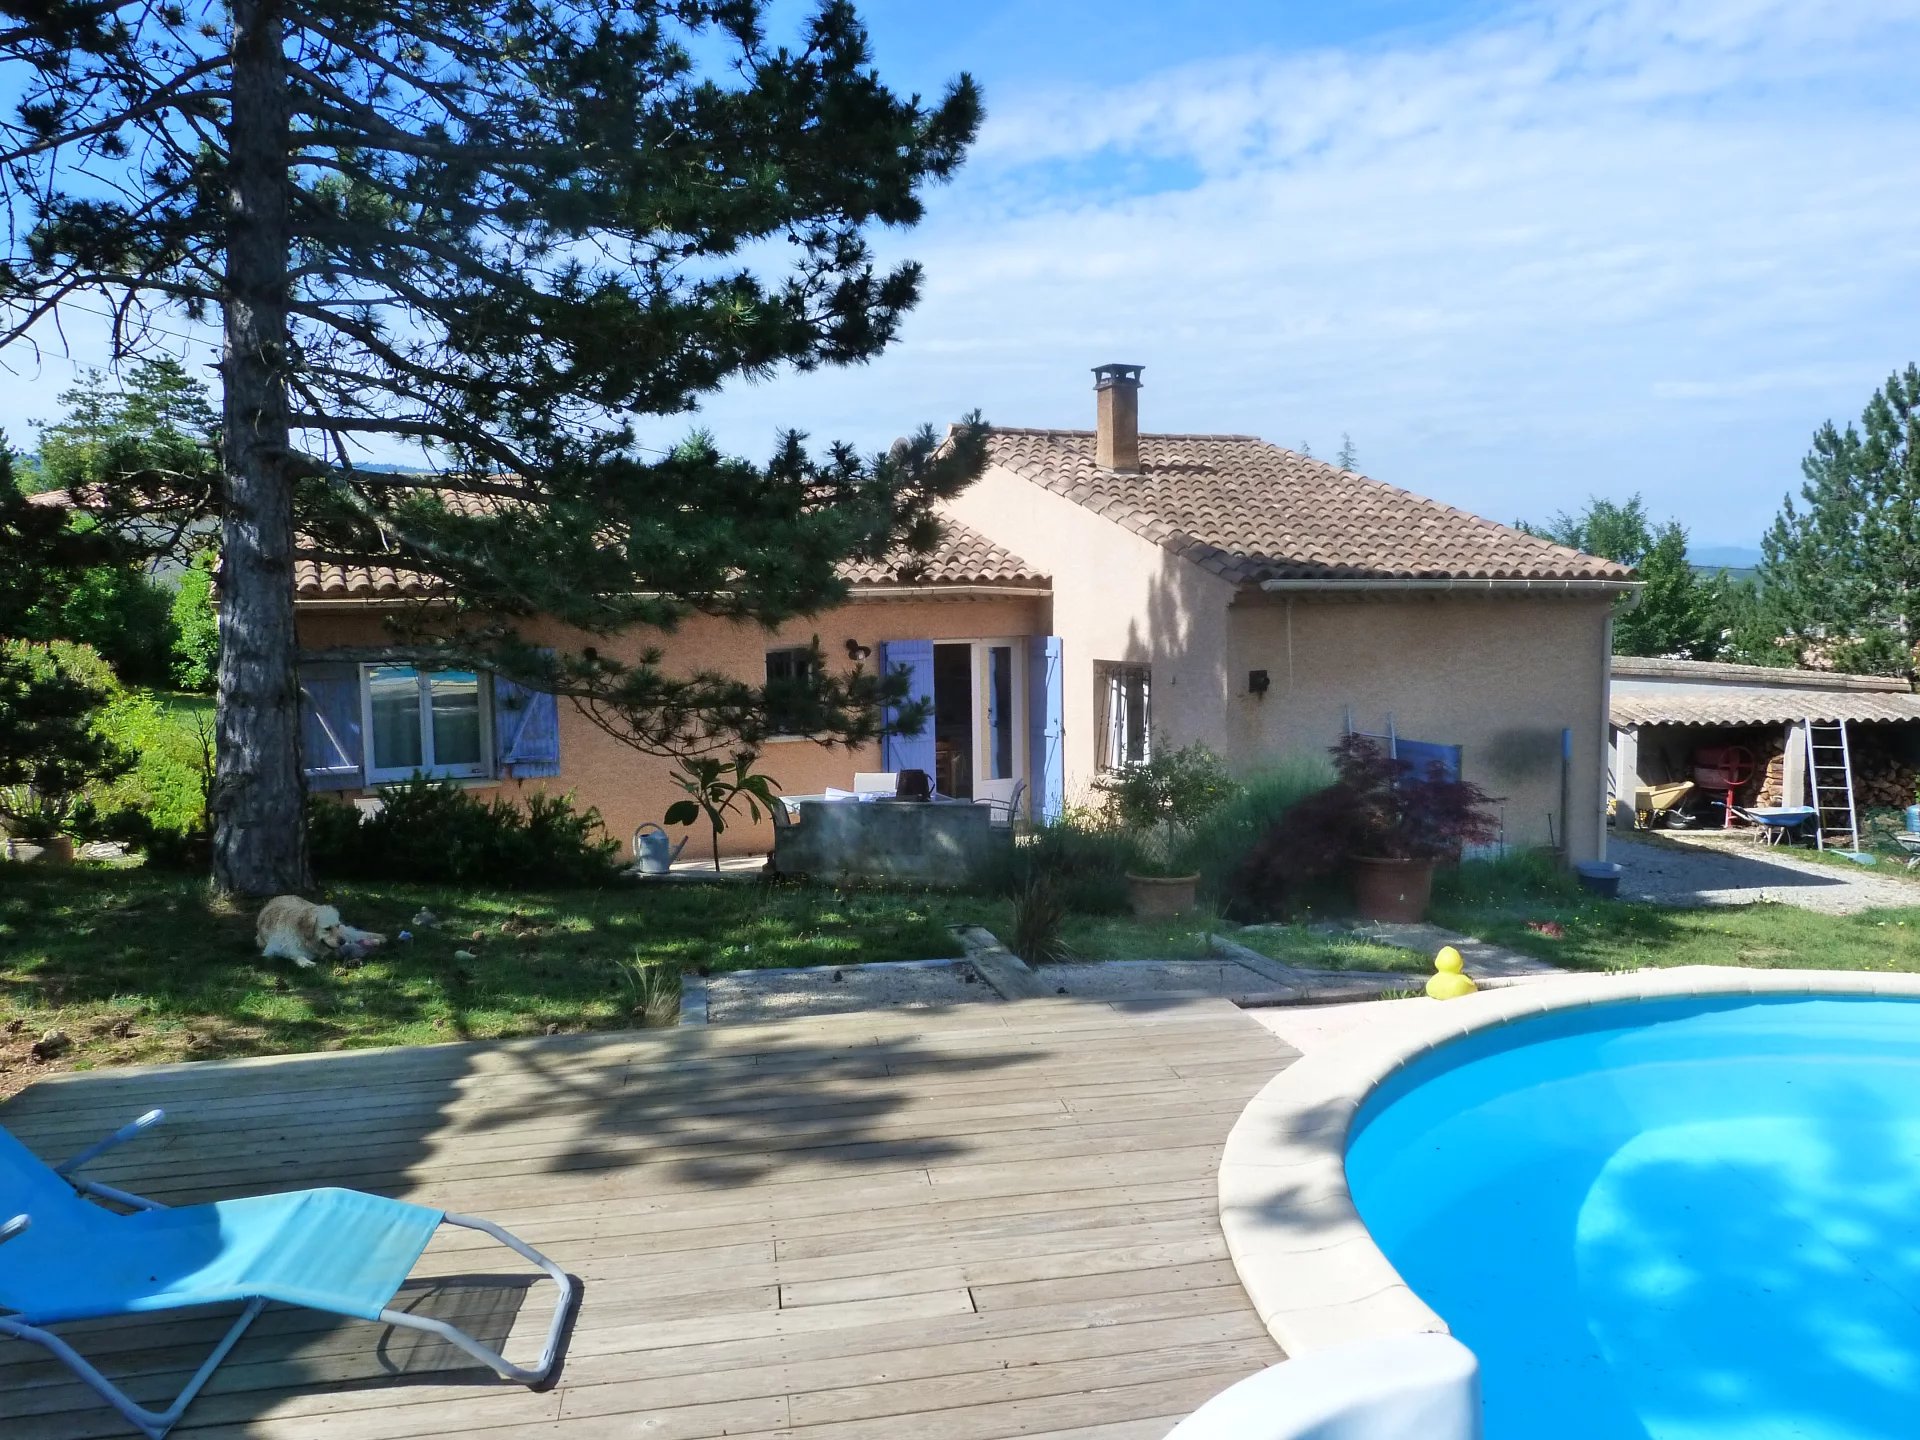 Charming 3 bedroom house with pool in mature gardens